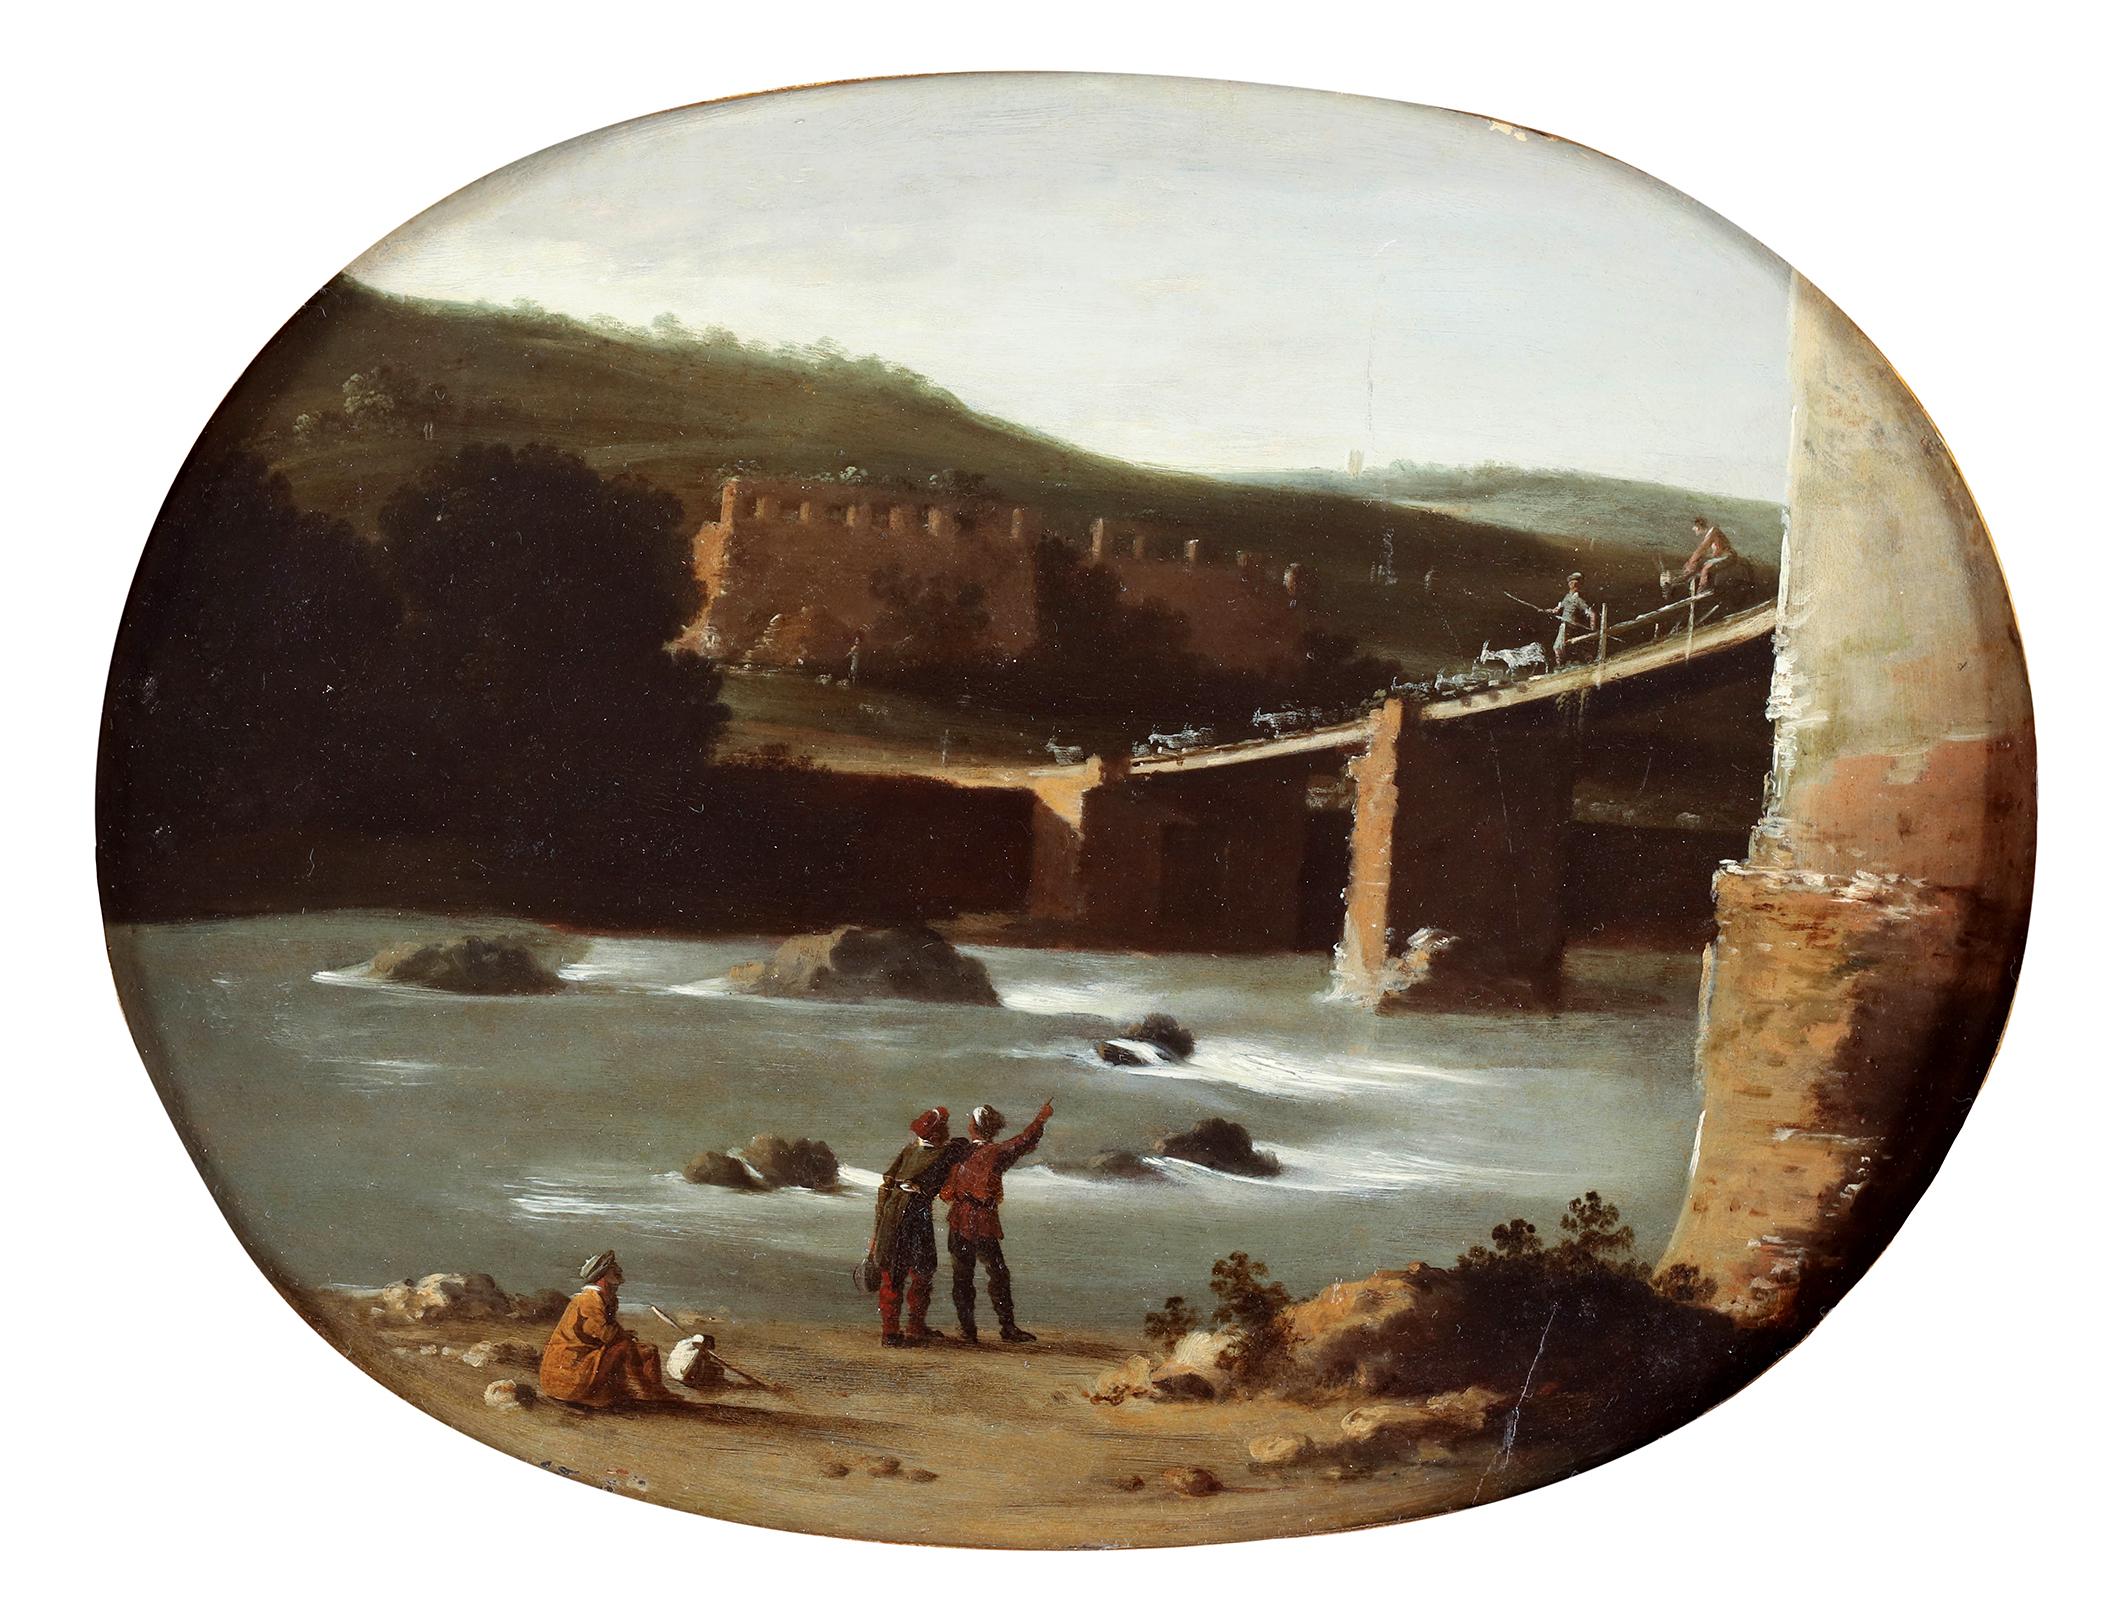 Oil on oval lime wood panel

Collection number on the back: 272

We see a herd of goats and their shepherds on the bridge, one of the shepherds is on a horse, the others look at the men near the riverbank. Two standing figures are pointing and